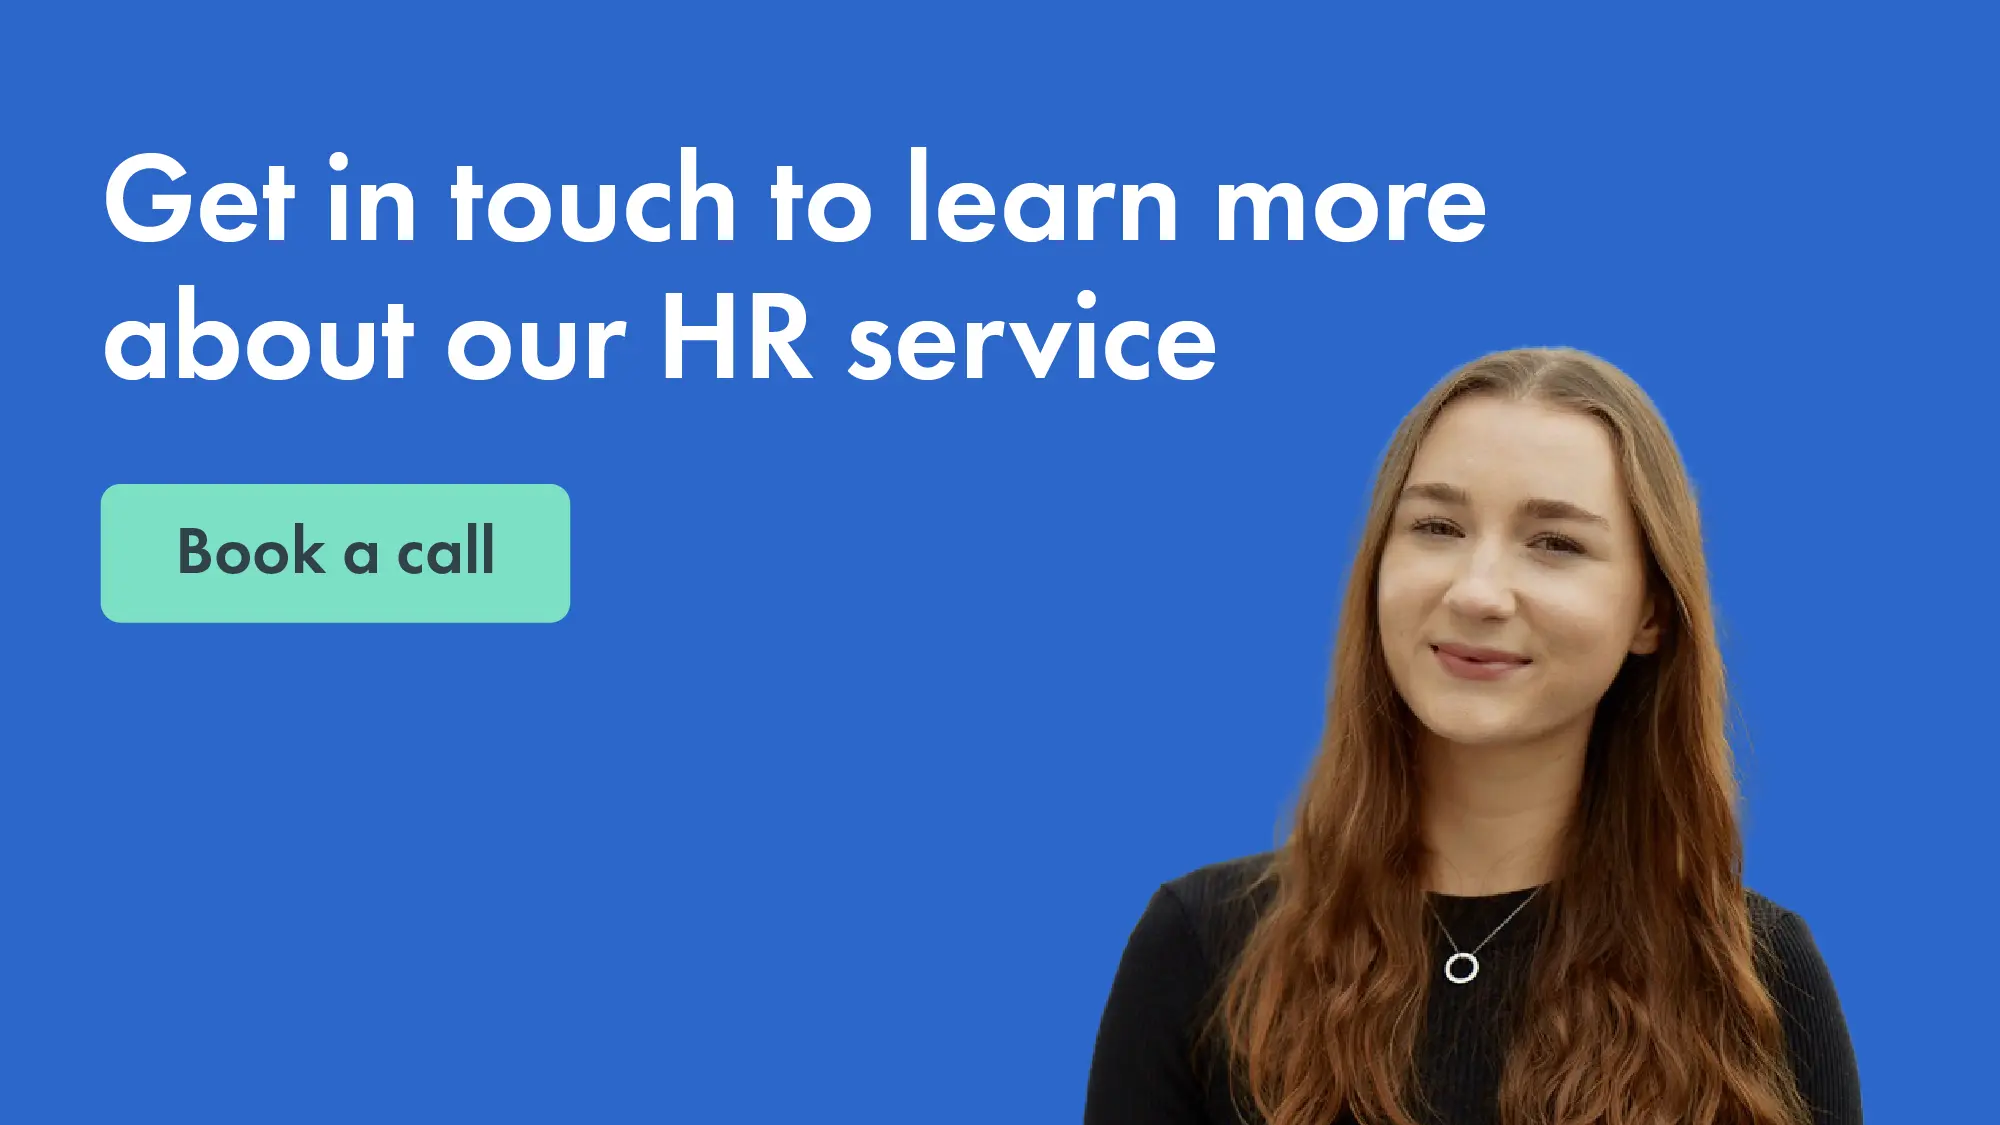 Click here to book a call to learn more about HR Advice